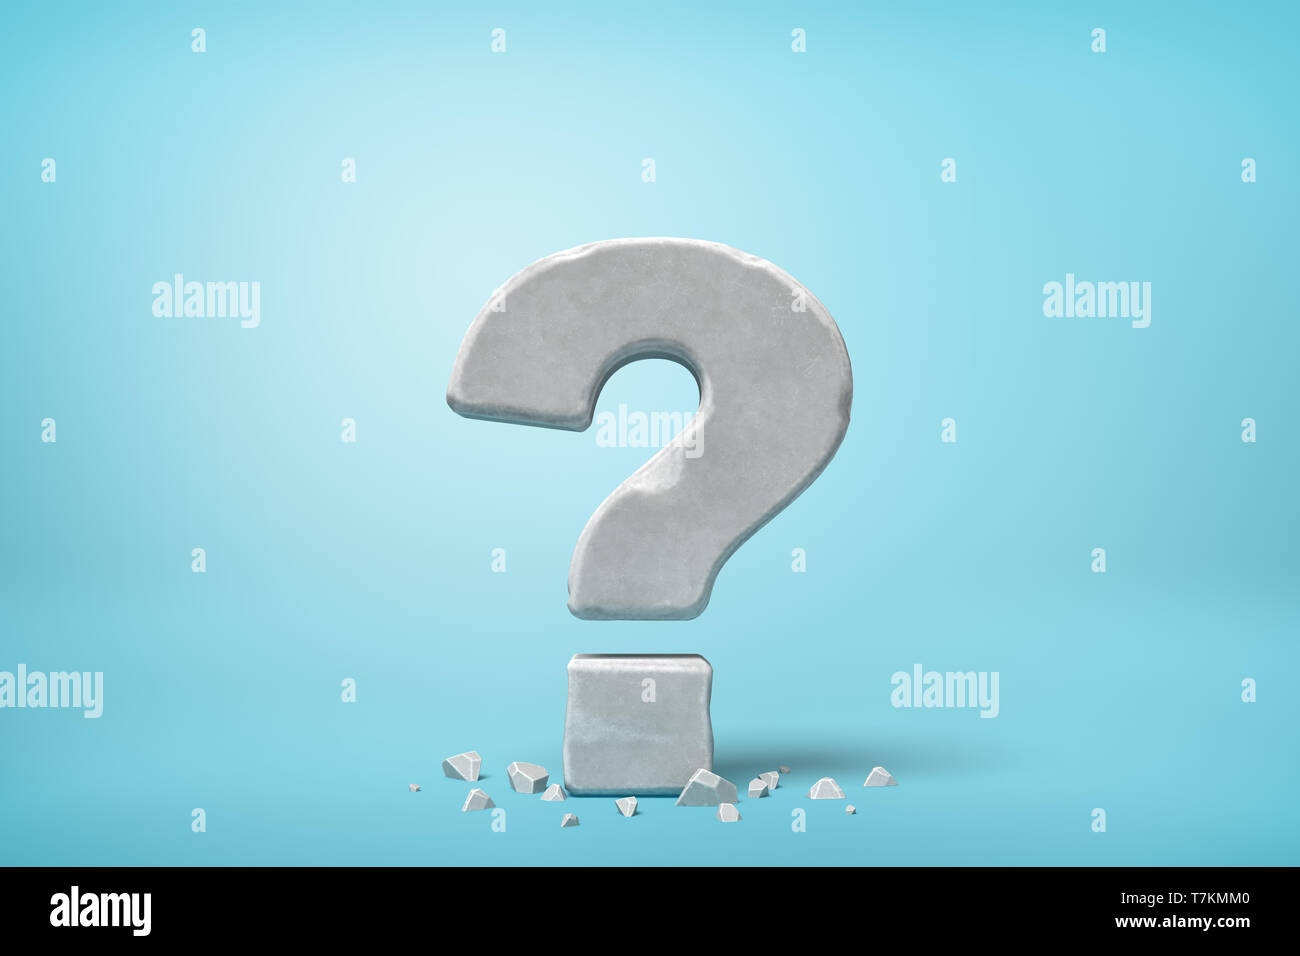 3d rendering of stone concrete question mark on blue background Stock Photo